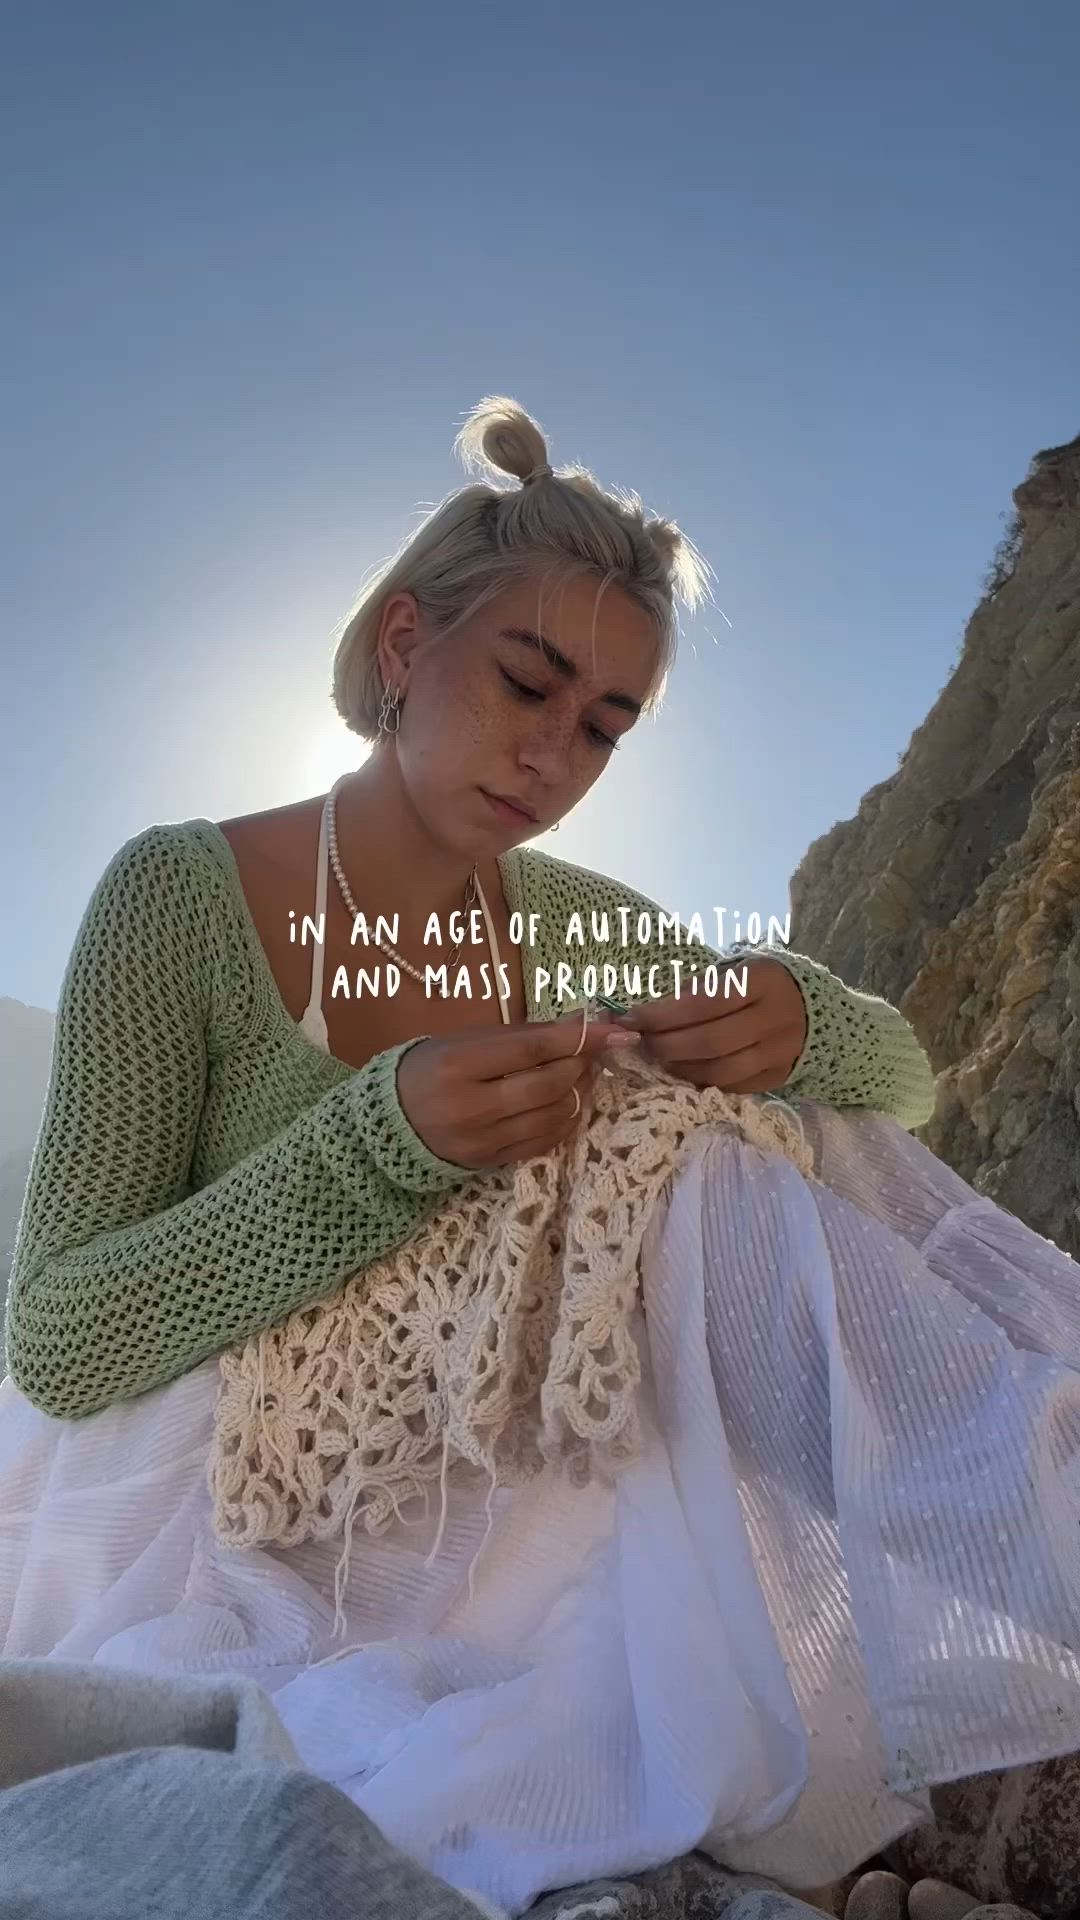 This may contain: a woman sitting on top of a rock next to a white netted dress and text that reads, in an age of auctionion and mass production